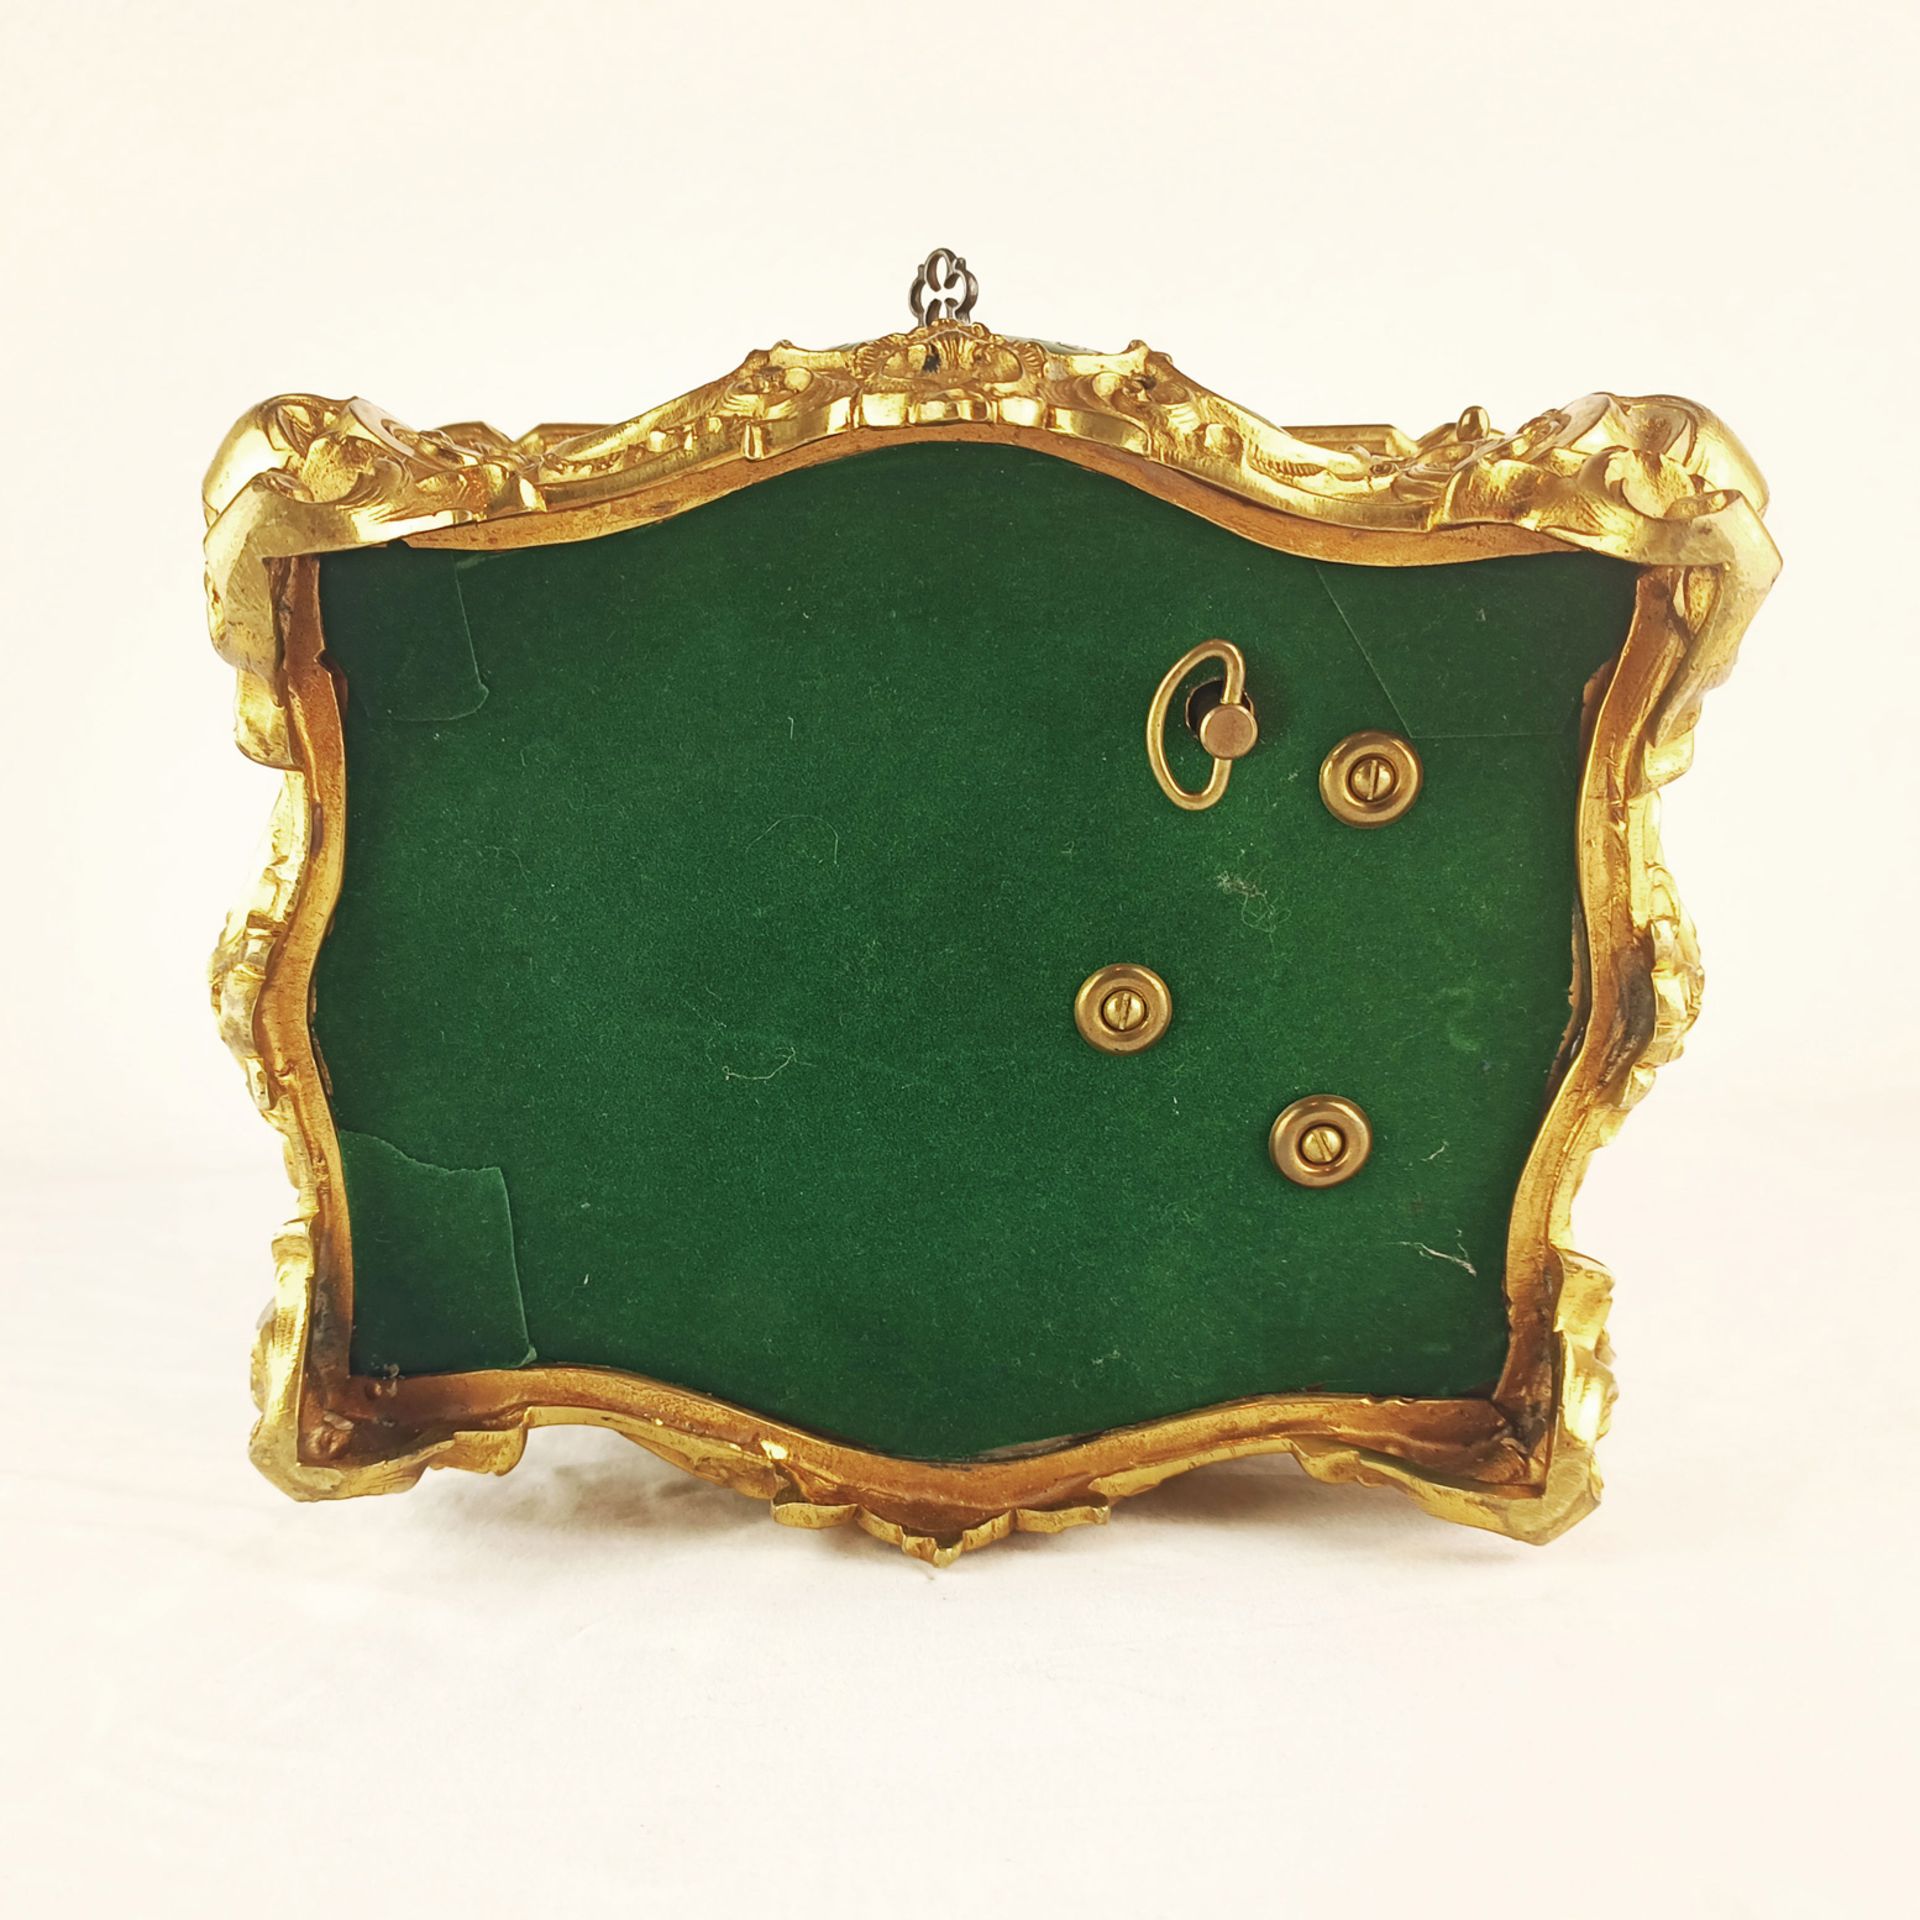 Unusual Brass and Horn Jewelry Music Box - Image 9 of 9